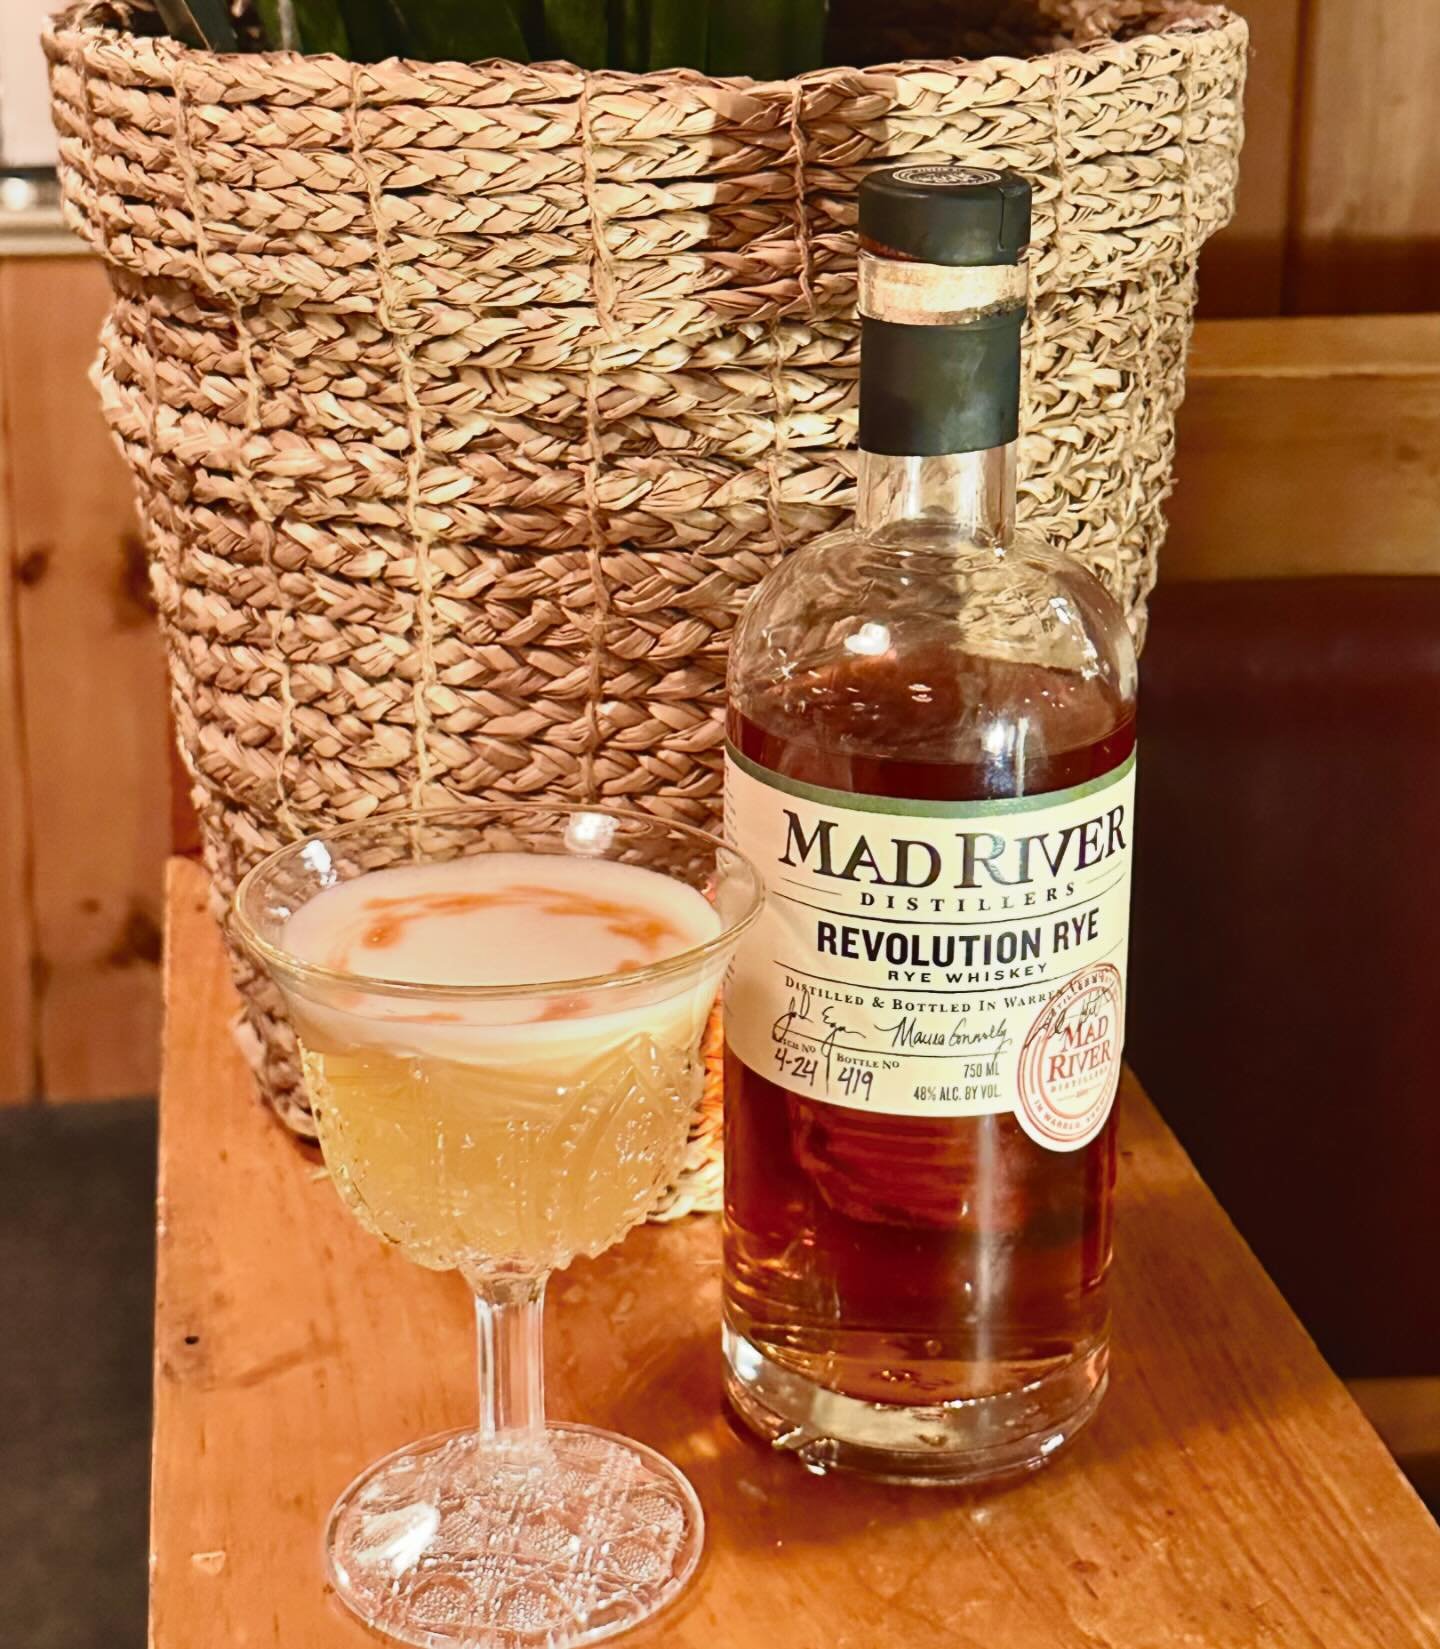 Attention Rye Lovers! We have a cocktail special tonight just for you 🥃 To welcome @madriverdistillers to The Barn family, we&rsquo;re showing it off in a Mad River Rye Peach Sour. It&rsquo;s a perfect balance of earthy notes of walnut, spice, and c